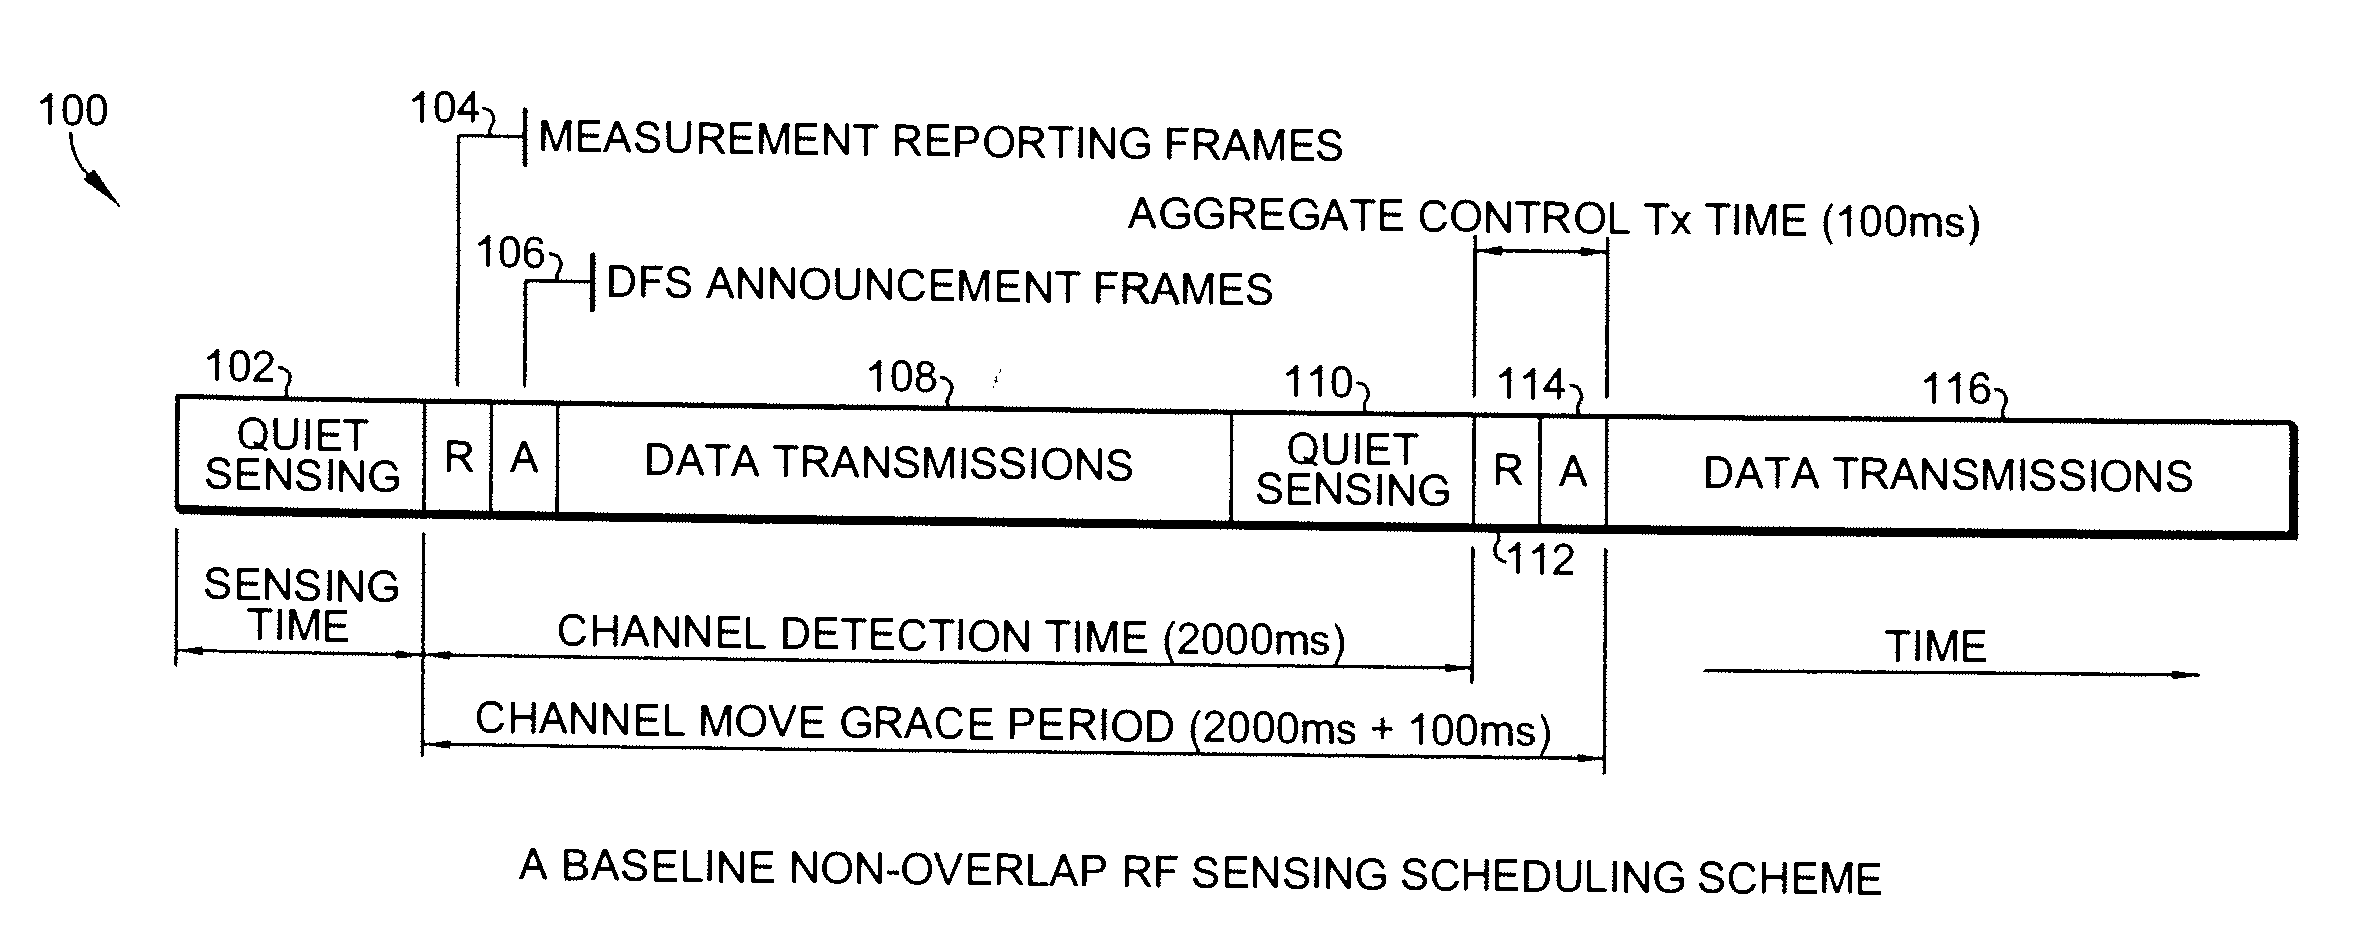 Method of inter-system communications dynamic spectrum access network systems-logical control connections